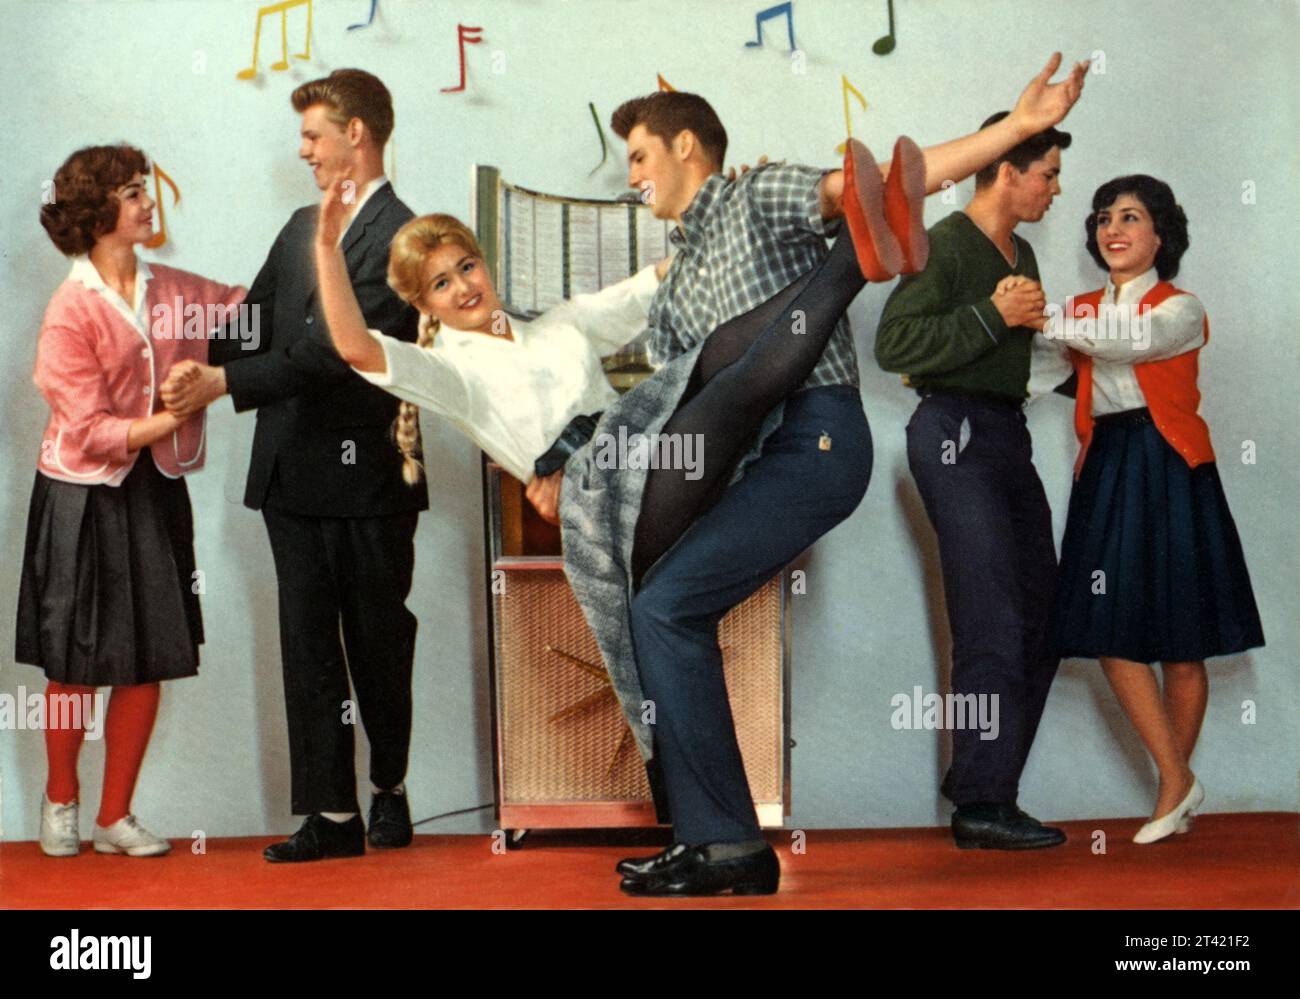 1958 ca,  WEST GERMANY : German postcard in real taste of FITIES YEARS , with TEENAGERS dressed in modern taste of ROCK'N ROLL HAPPY DAYS AGE , they dance acrobatic around a juke box . Unknown photographer . - HISTORY - FOTO STORICHE - TEENAGERS - MODA AMERICANA - AMERICAN FASHION - ANNI CINQANTA - 50's - '50 -  1950's - DESIGN - POP - JUKE-BOX - donna - woman  - ragazze - ragazzi - BOYS - YOUNG GIRLS - WOMEN - PANTALONE -  STILE - STYLE - blonde - summer  jamboree  - MUSICA - MUSIC - MODERNO - MODERN - ROCK'A BILLY - DANCE - DANZA ACROBATICA - BALLO - DANCING - PARTY - FESTA - alle Stock Photo